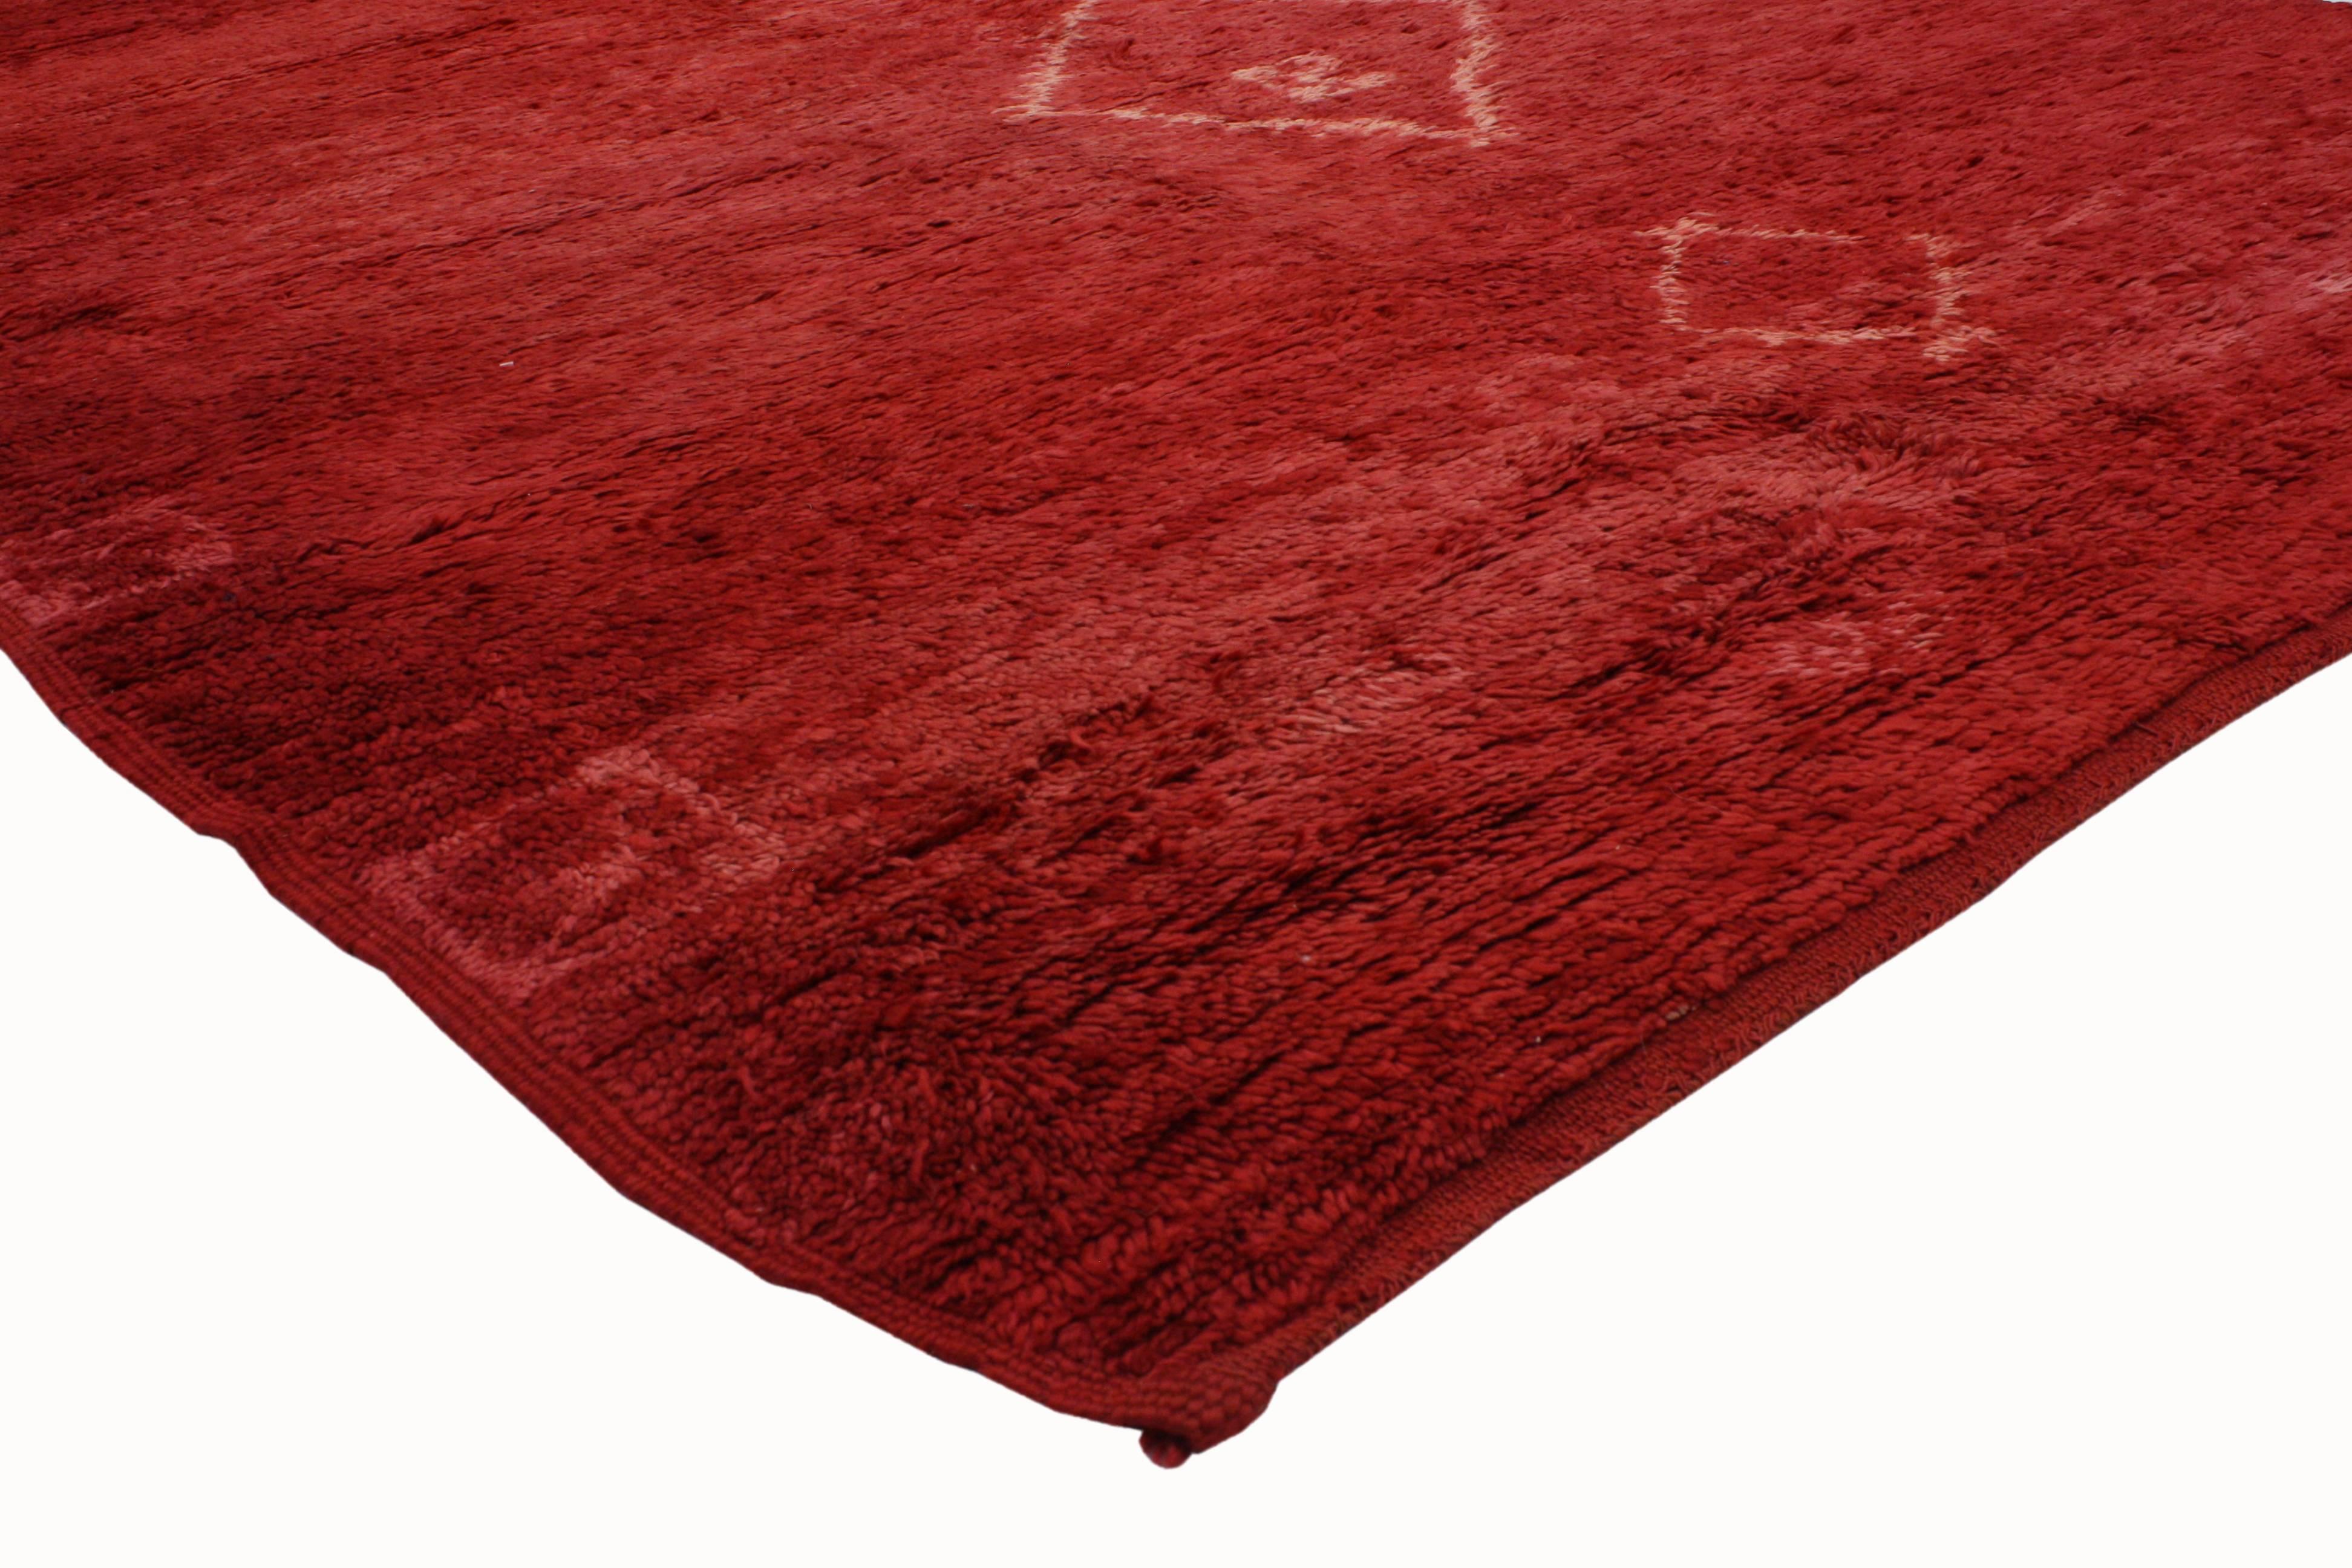  20112 Vintage Berber Red Moroccan Rug with Tribal Style 05'08 x 08'00. This hand knotted wool vintage Berber red Moroccan rug emanates function and versatility while staying true to the authentic spirit of Berber Tribe culture. Featuring fiery